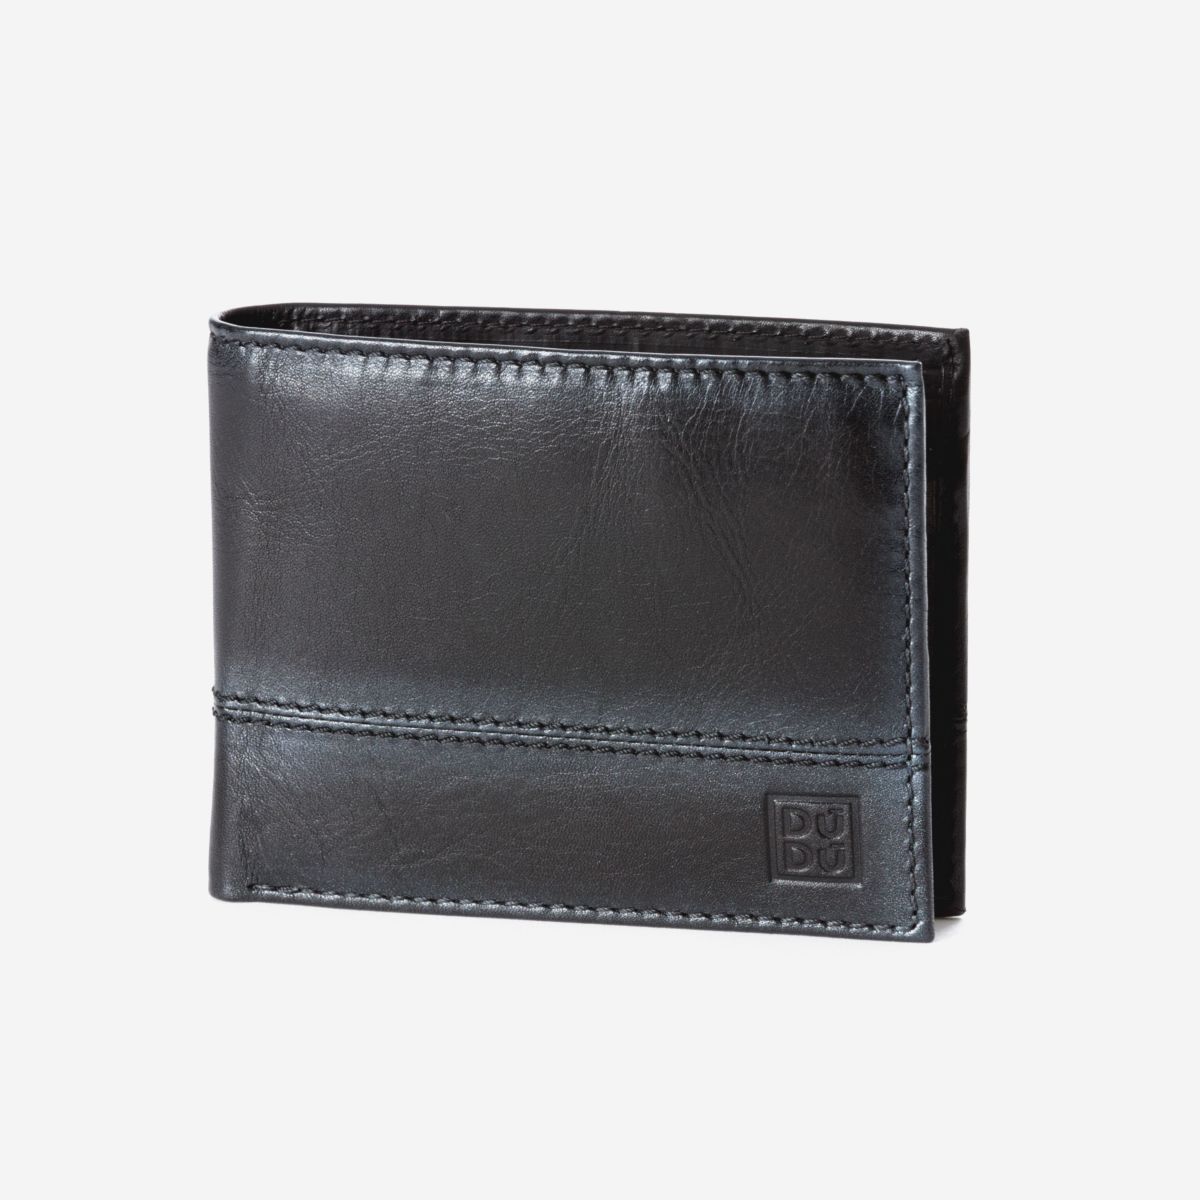 DuDu Mens Leather Wallet with Coin Pocket - Black